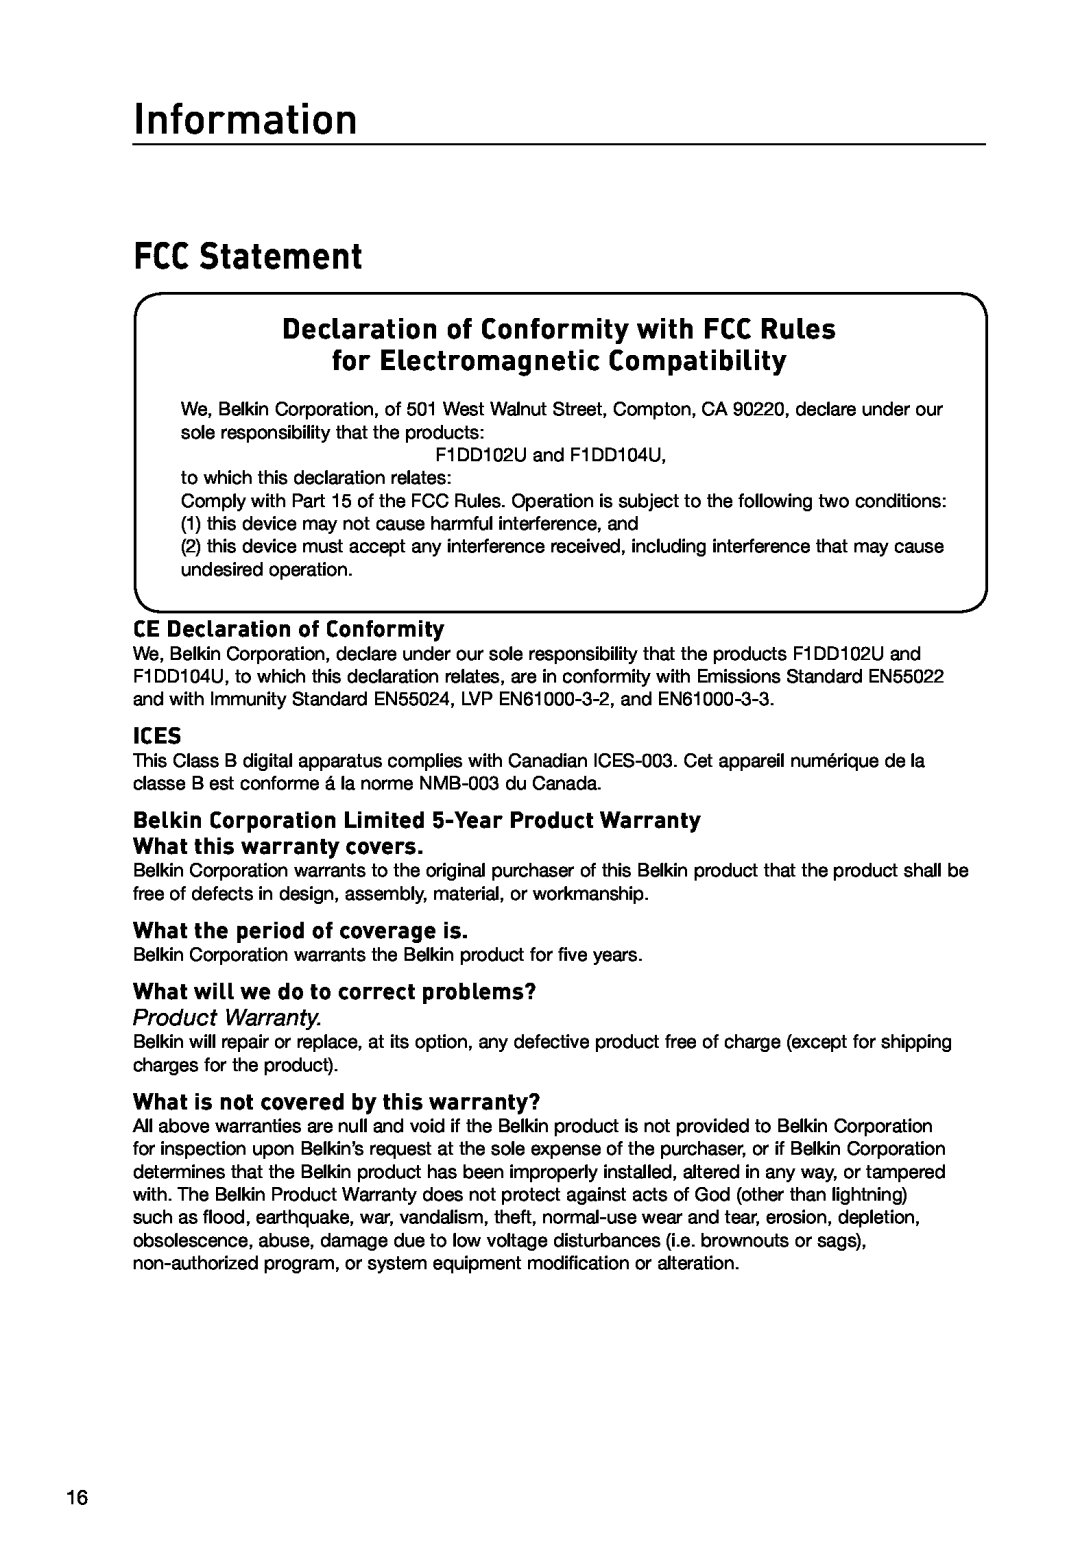 Belkin F1DD102U manual Information, FCC Statement, CE Declaration of Conformity, Ices, What this warranty covers 